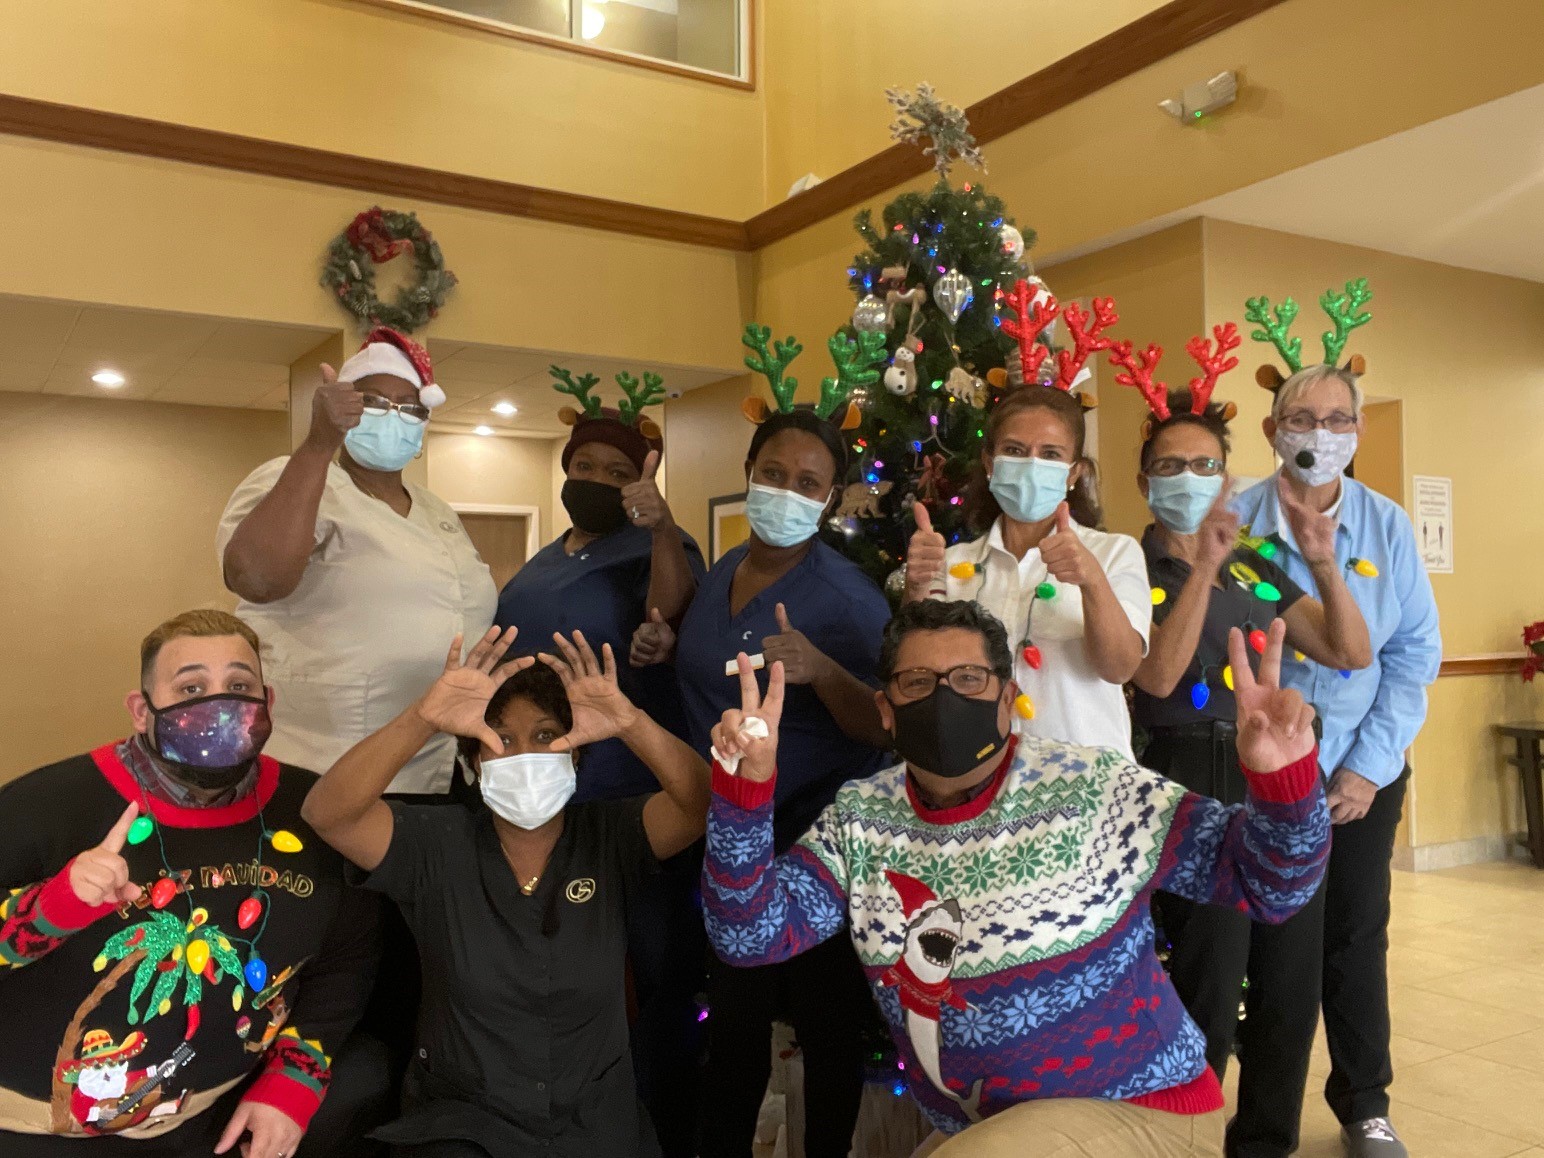 Hotel employees wearing masks during Christmas party